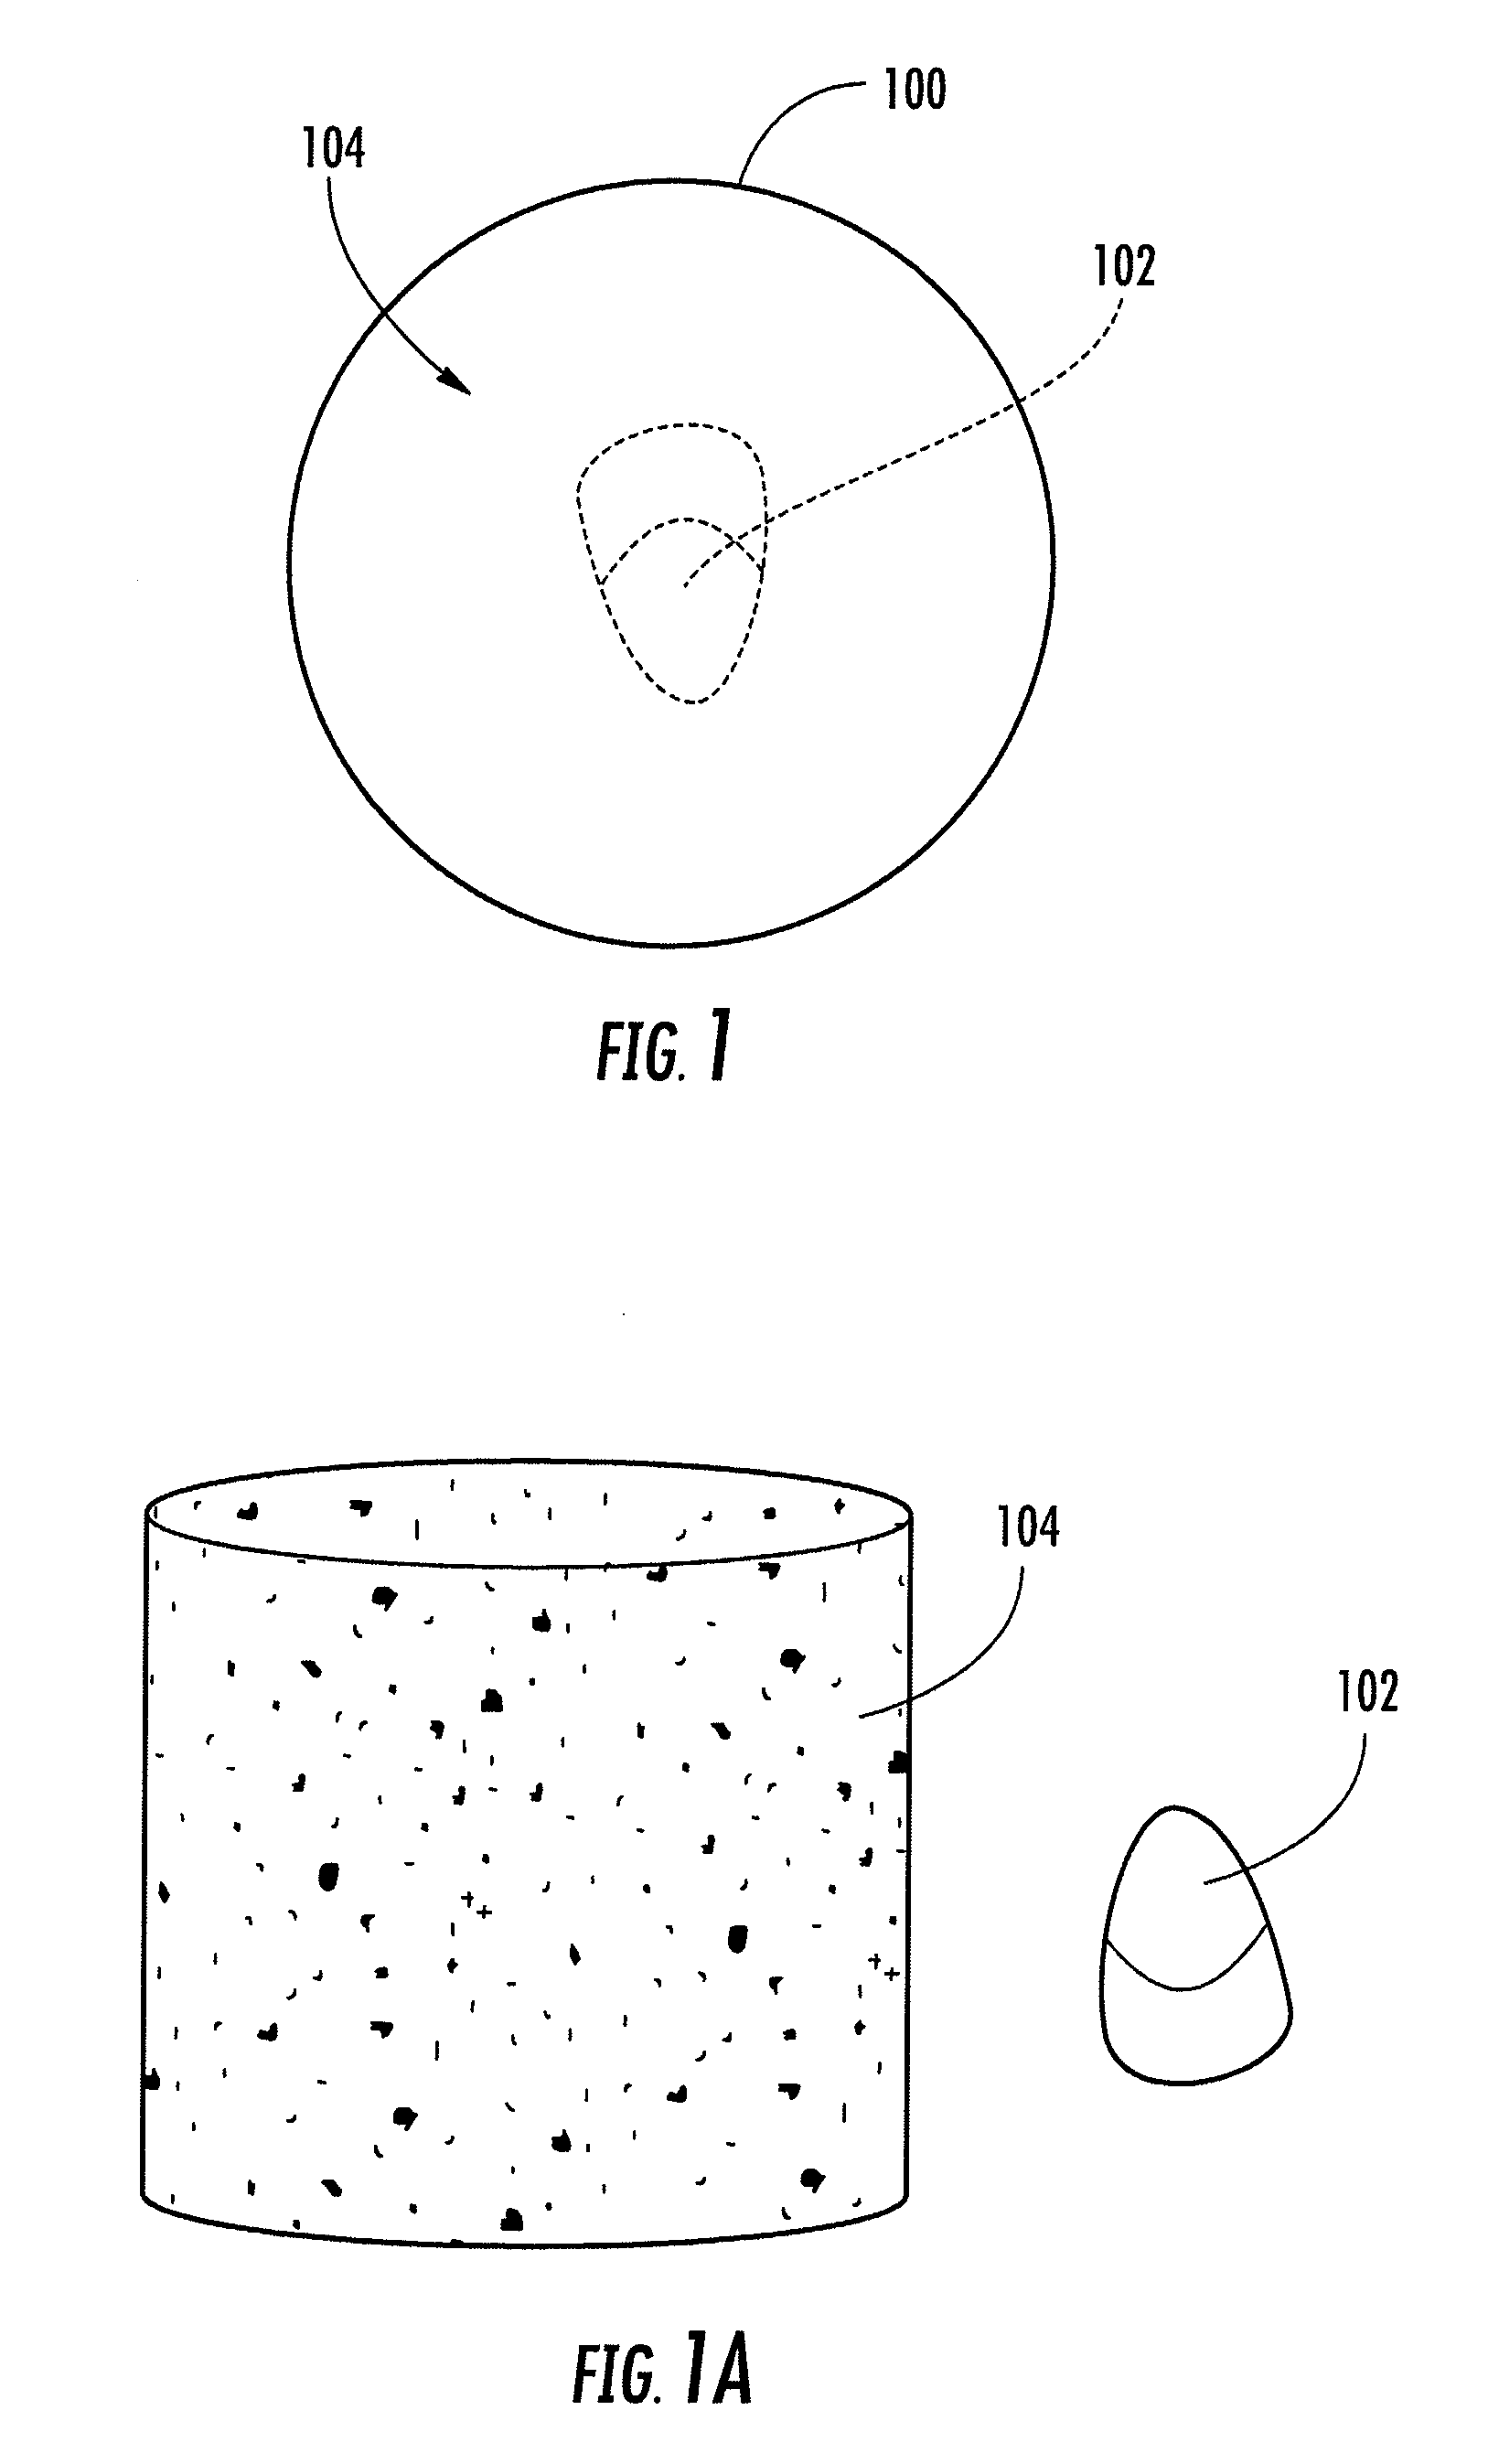 Encapsulated seed articles and method of making same